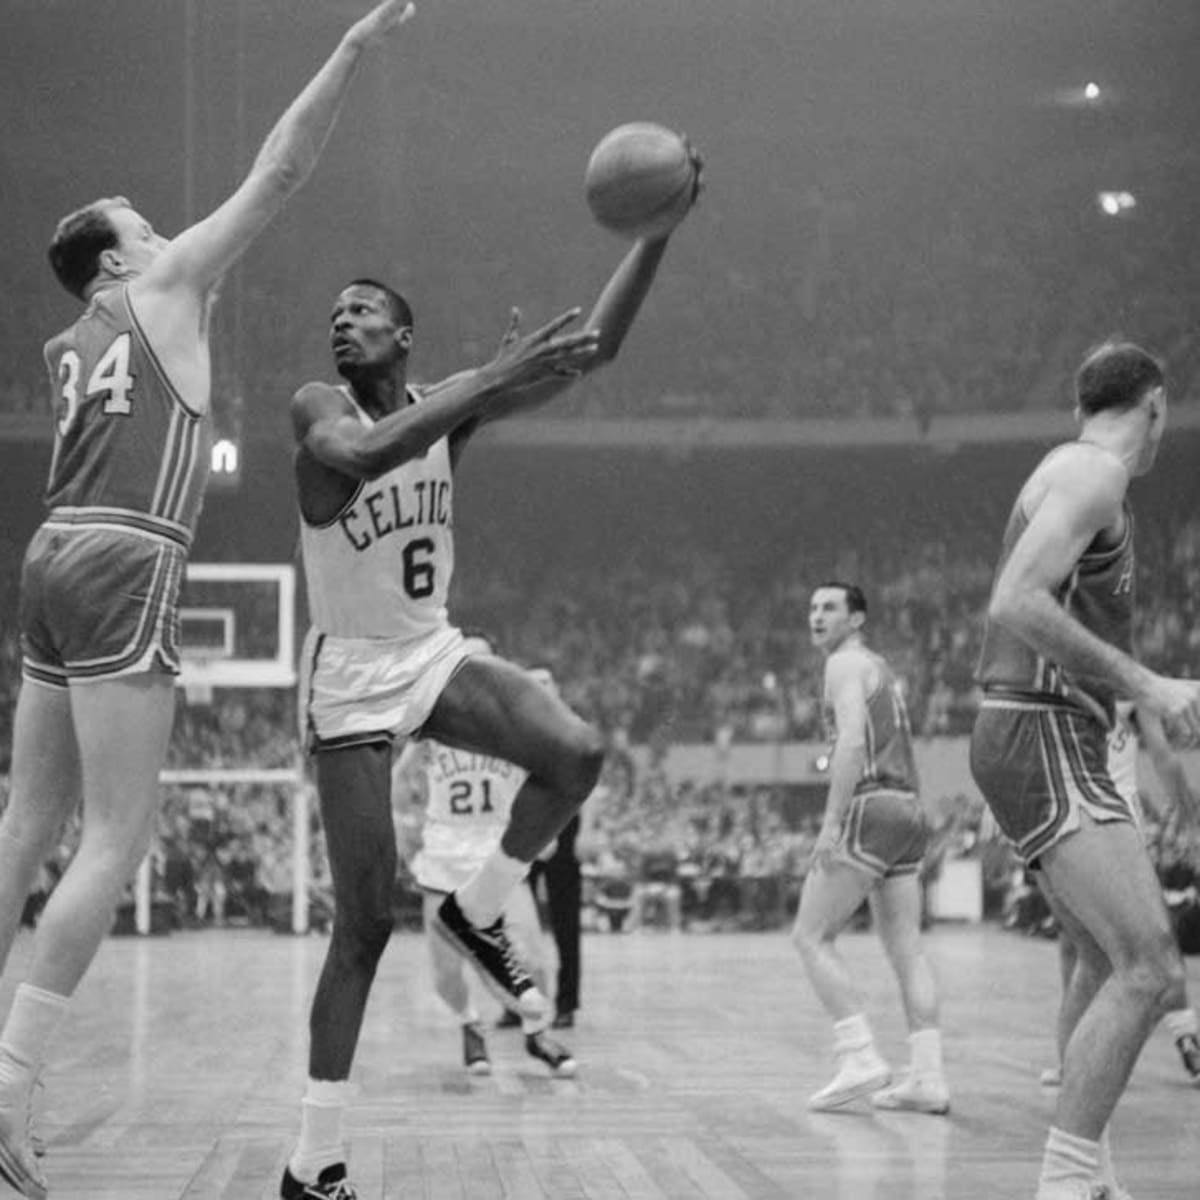 Historic Bill Russell Collection up for bid at special Hunt